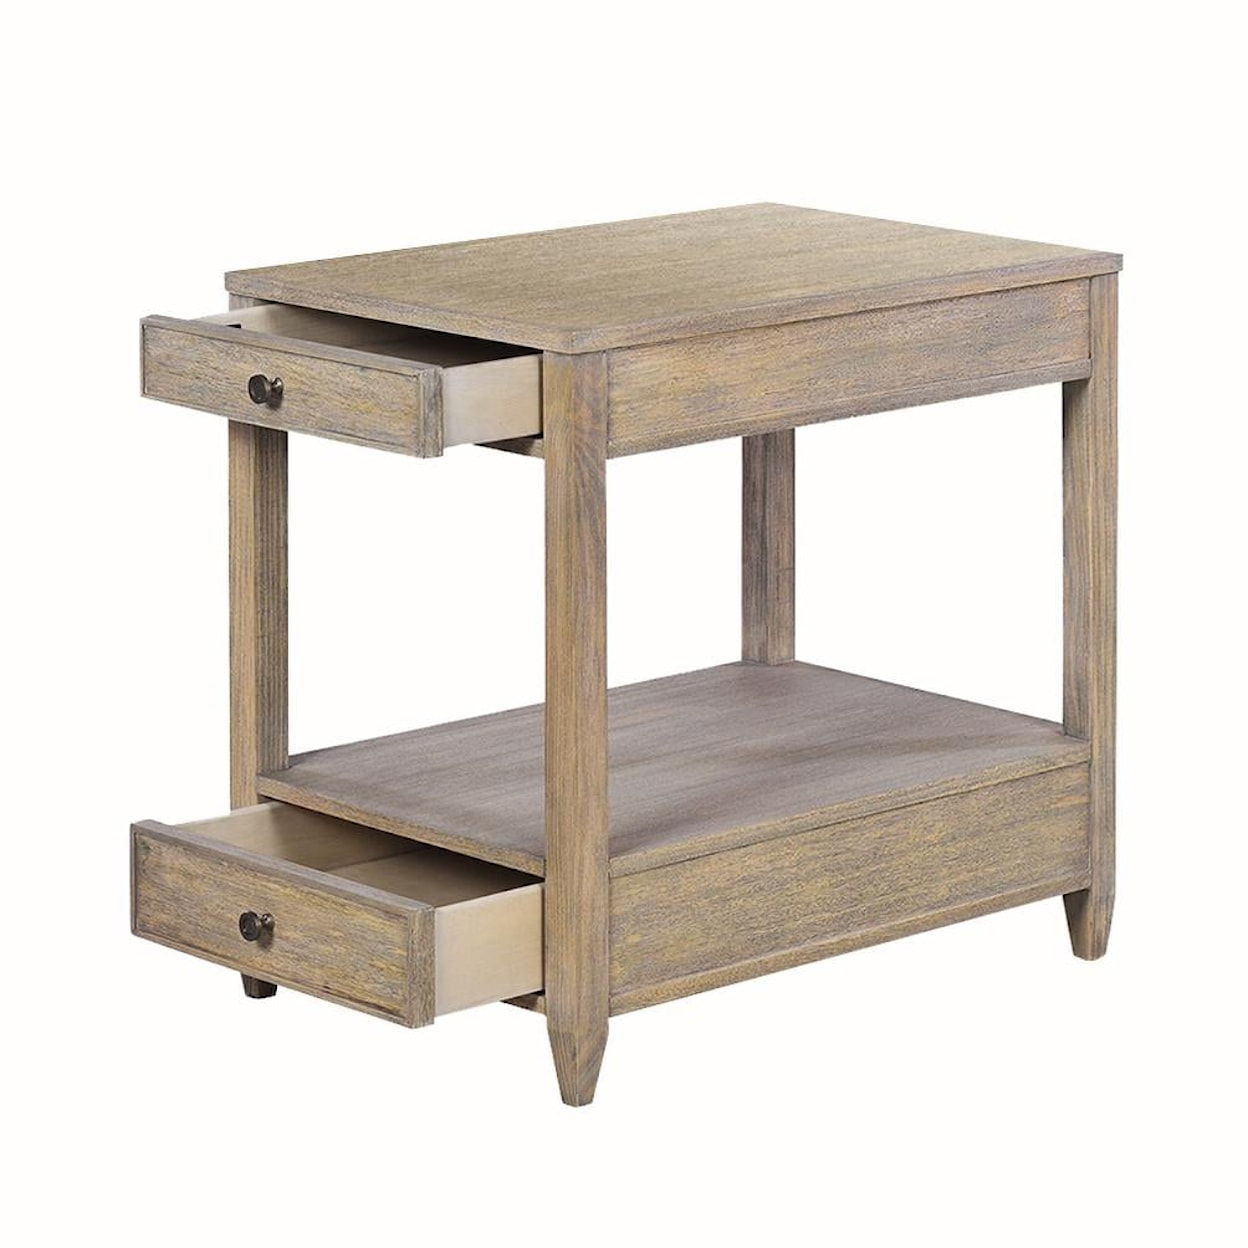 Oliver Home Furnishings End/ Side Tables NARROW, 2 DRAWER SIDE TABLE- RABBIT